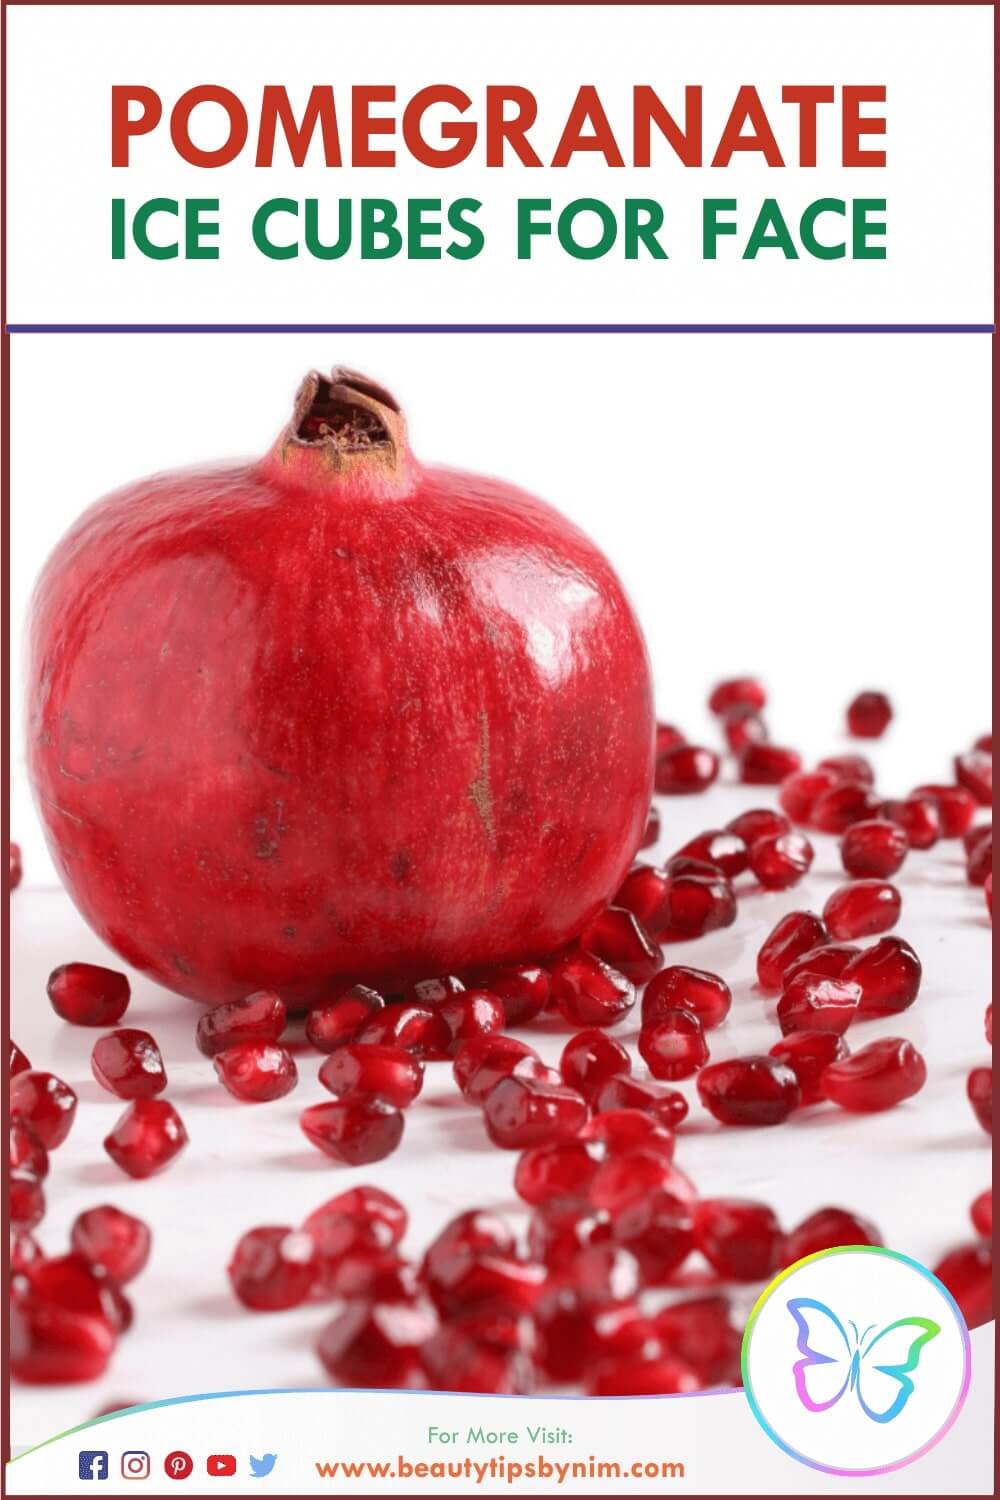 Pomegranate Ice Cubes For Face Top 10 Remedies - Beauty Tips By Nim - Nimisha Goyal - HashBUGS - BTN - Nimify Beauty - beautytipsbynim.com